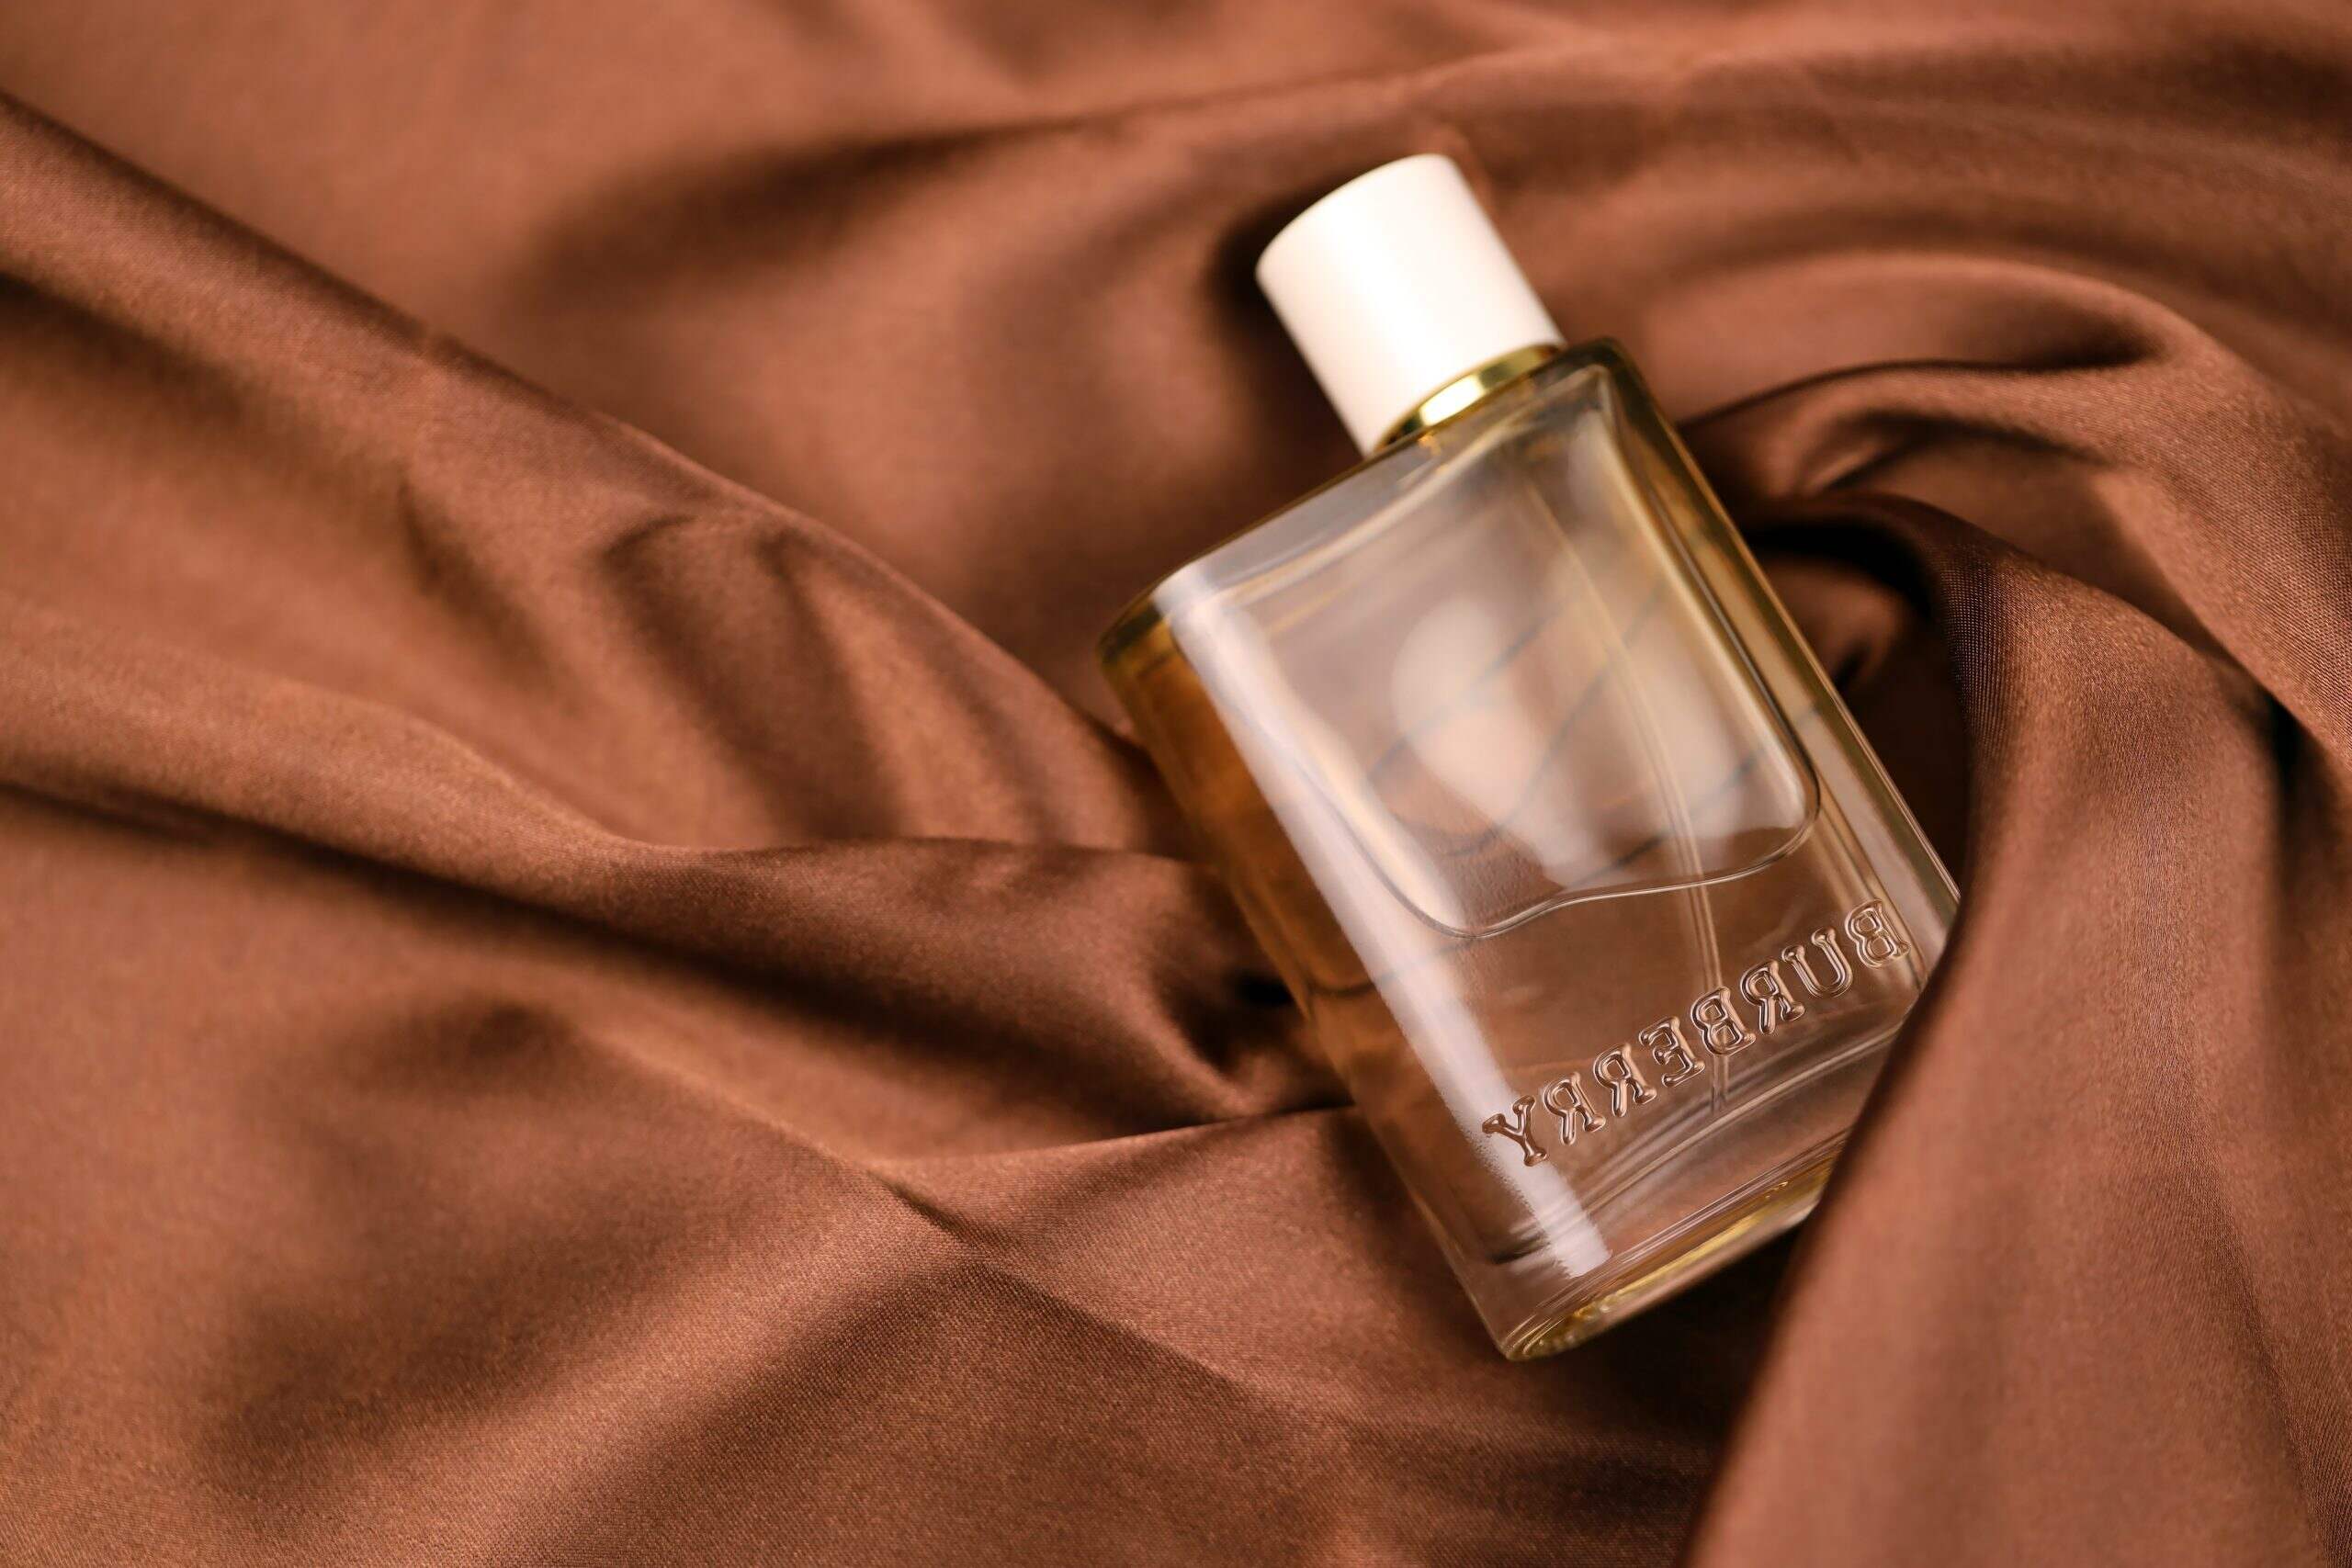 Captivating Fragrance: A Review of ‘For Her’ Perfume